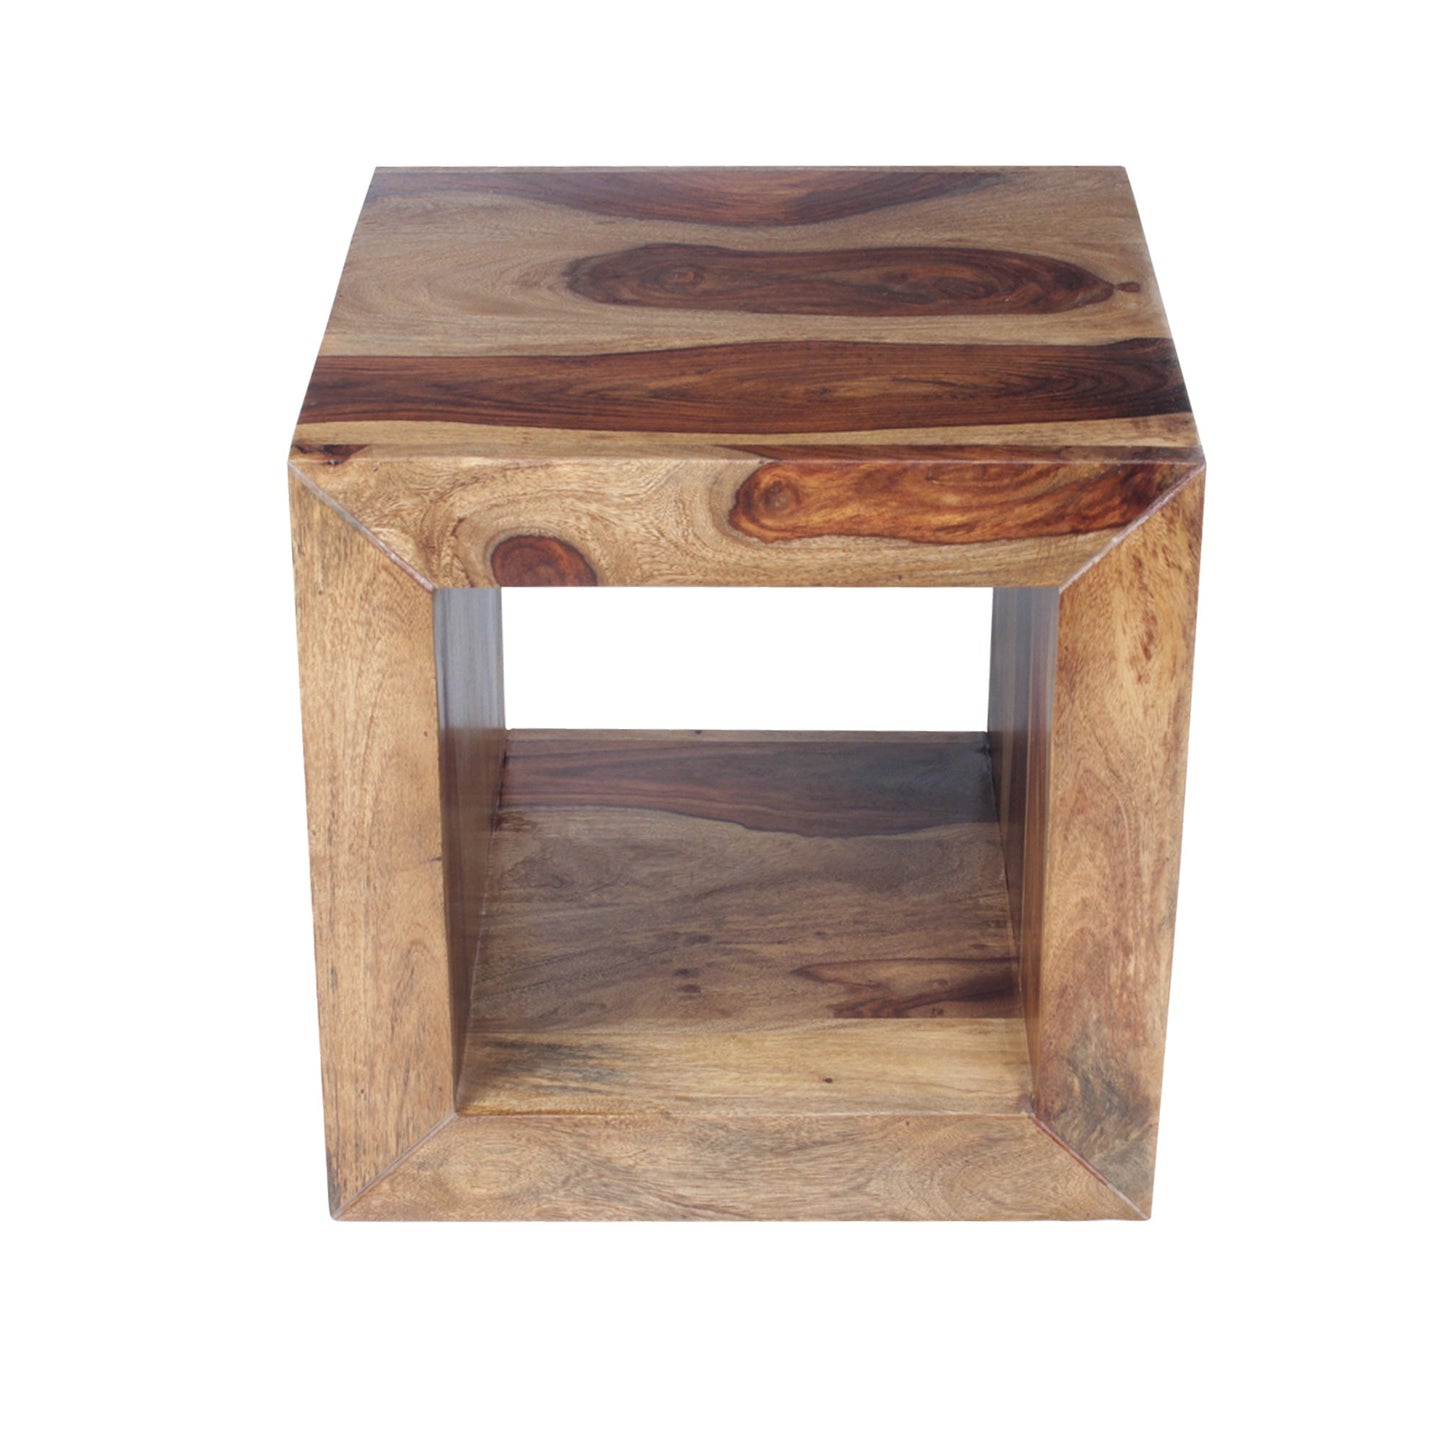 Cube Shape Rosewood Side Table With Cutout Bottom by Blak Hom